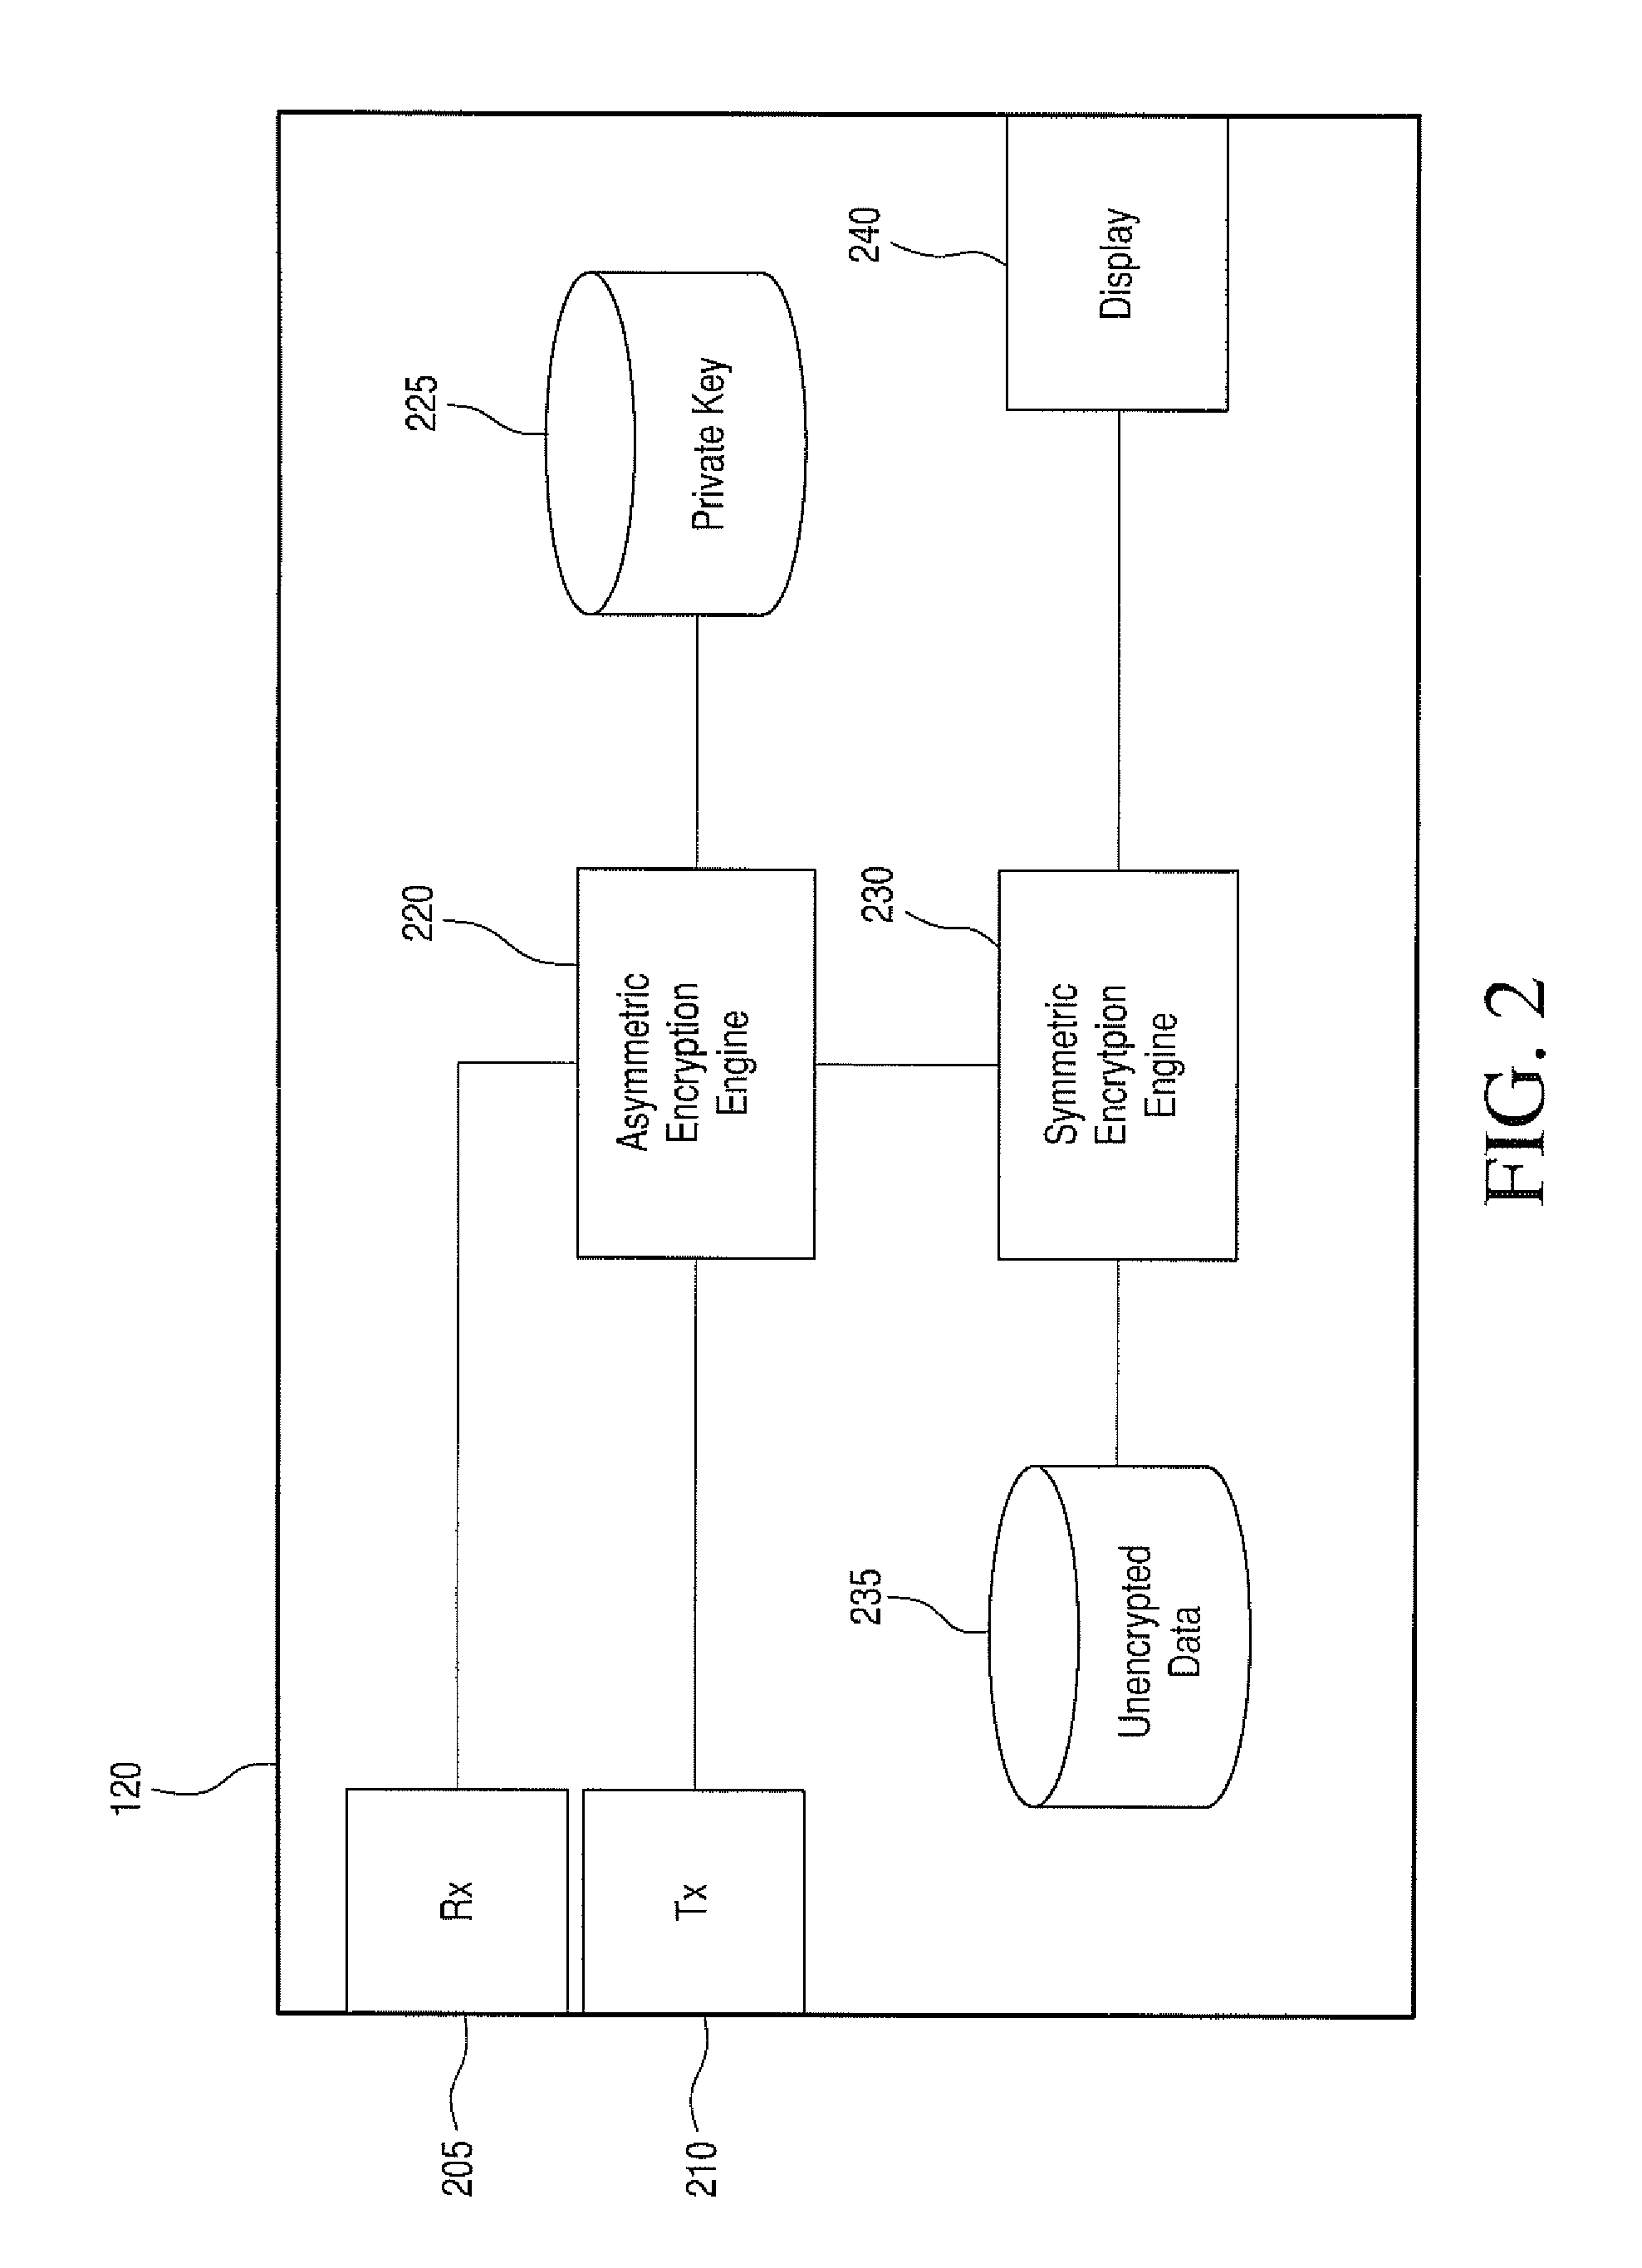 Data storage incorporating cryptographically enhanced data protection